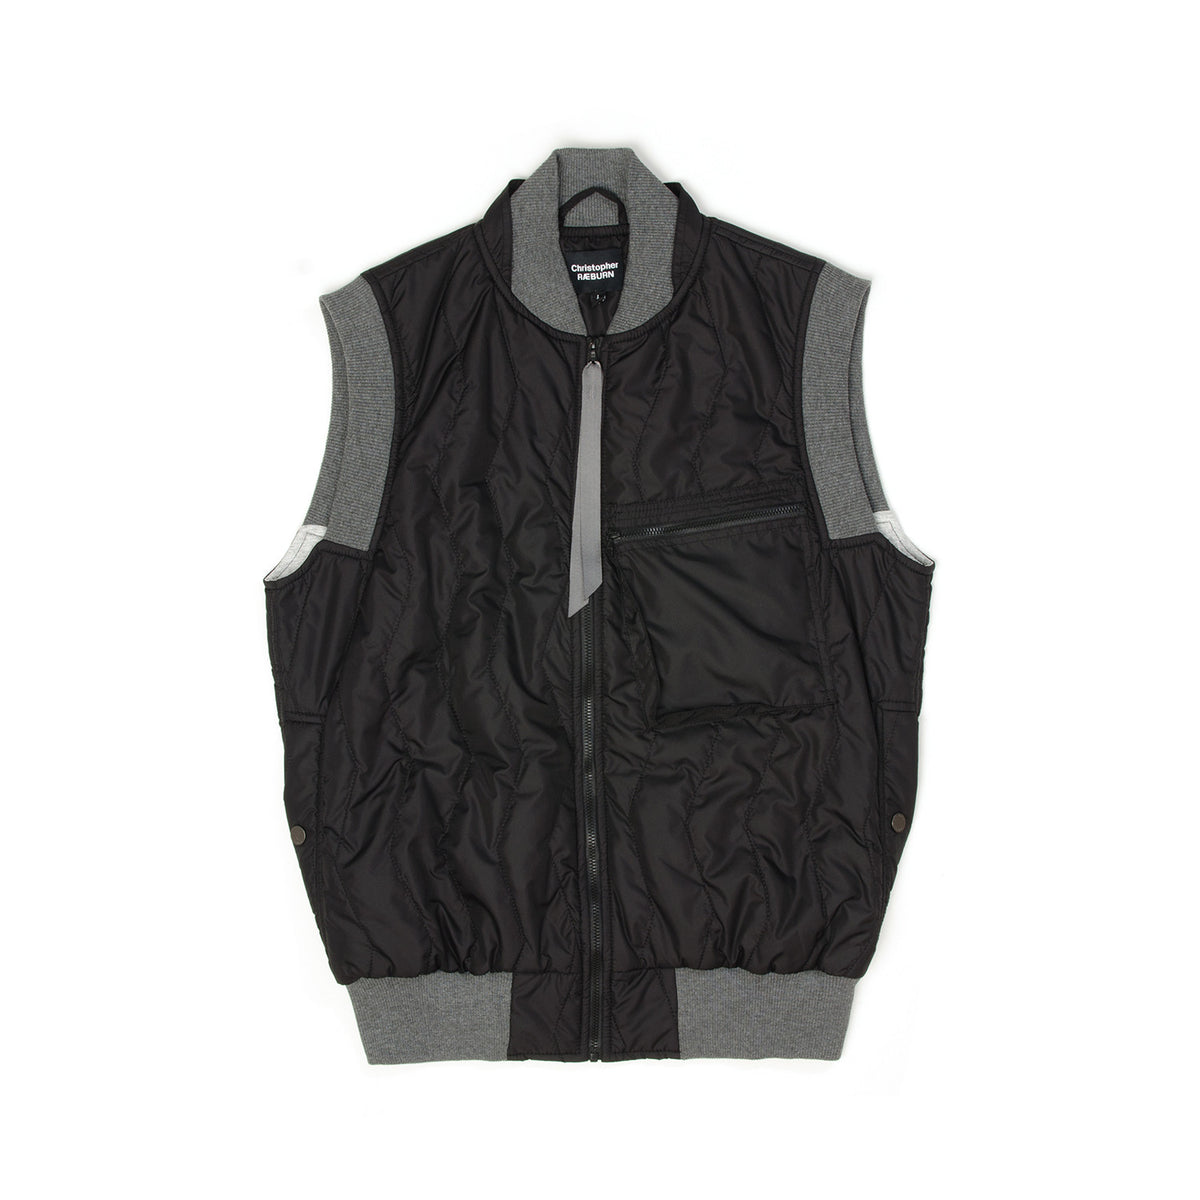 Christopher Raeburn Zipfront Quilted Gilet - Concrete